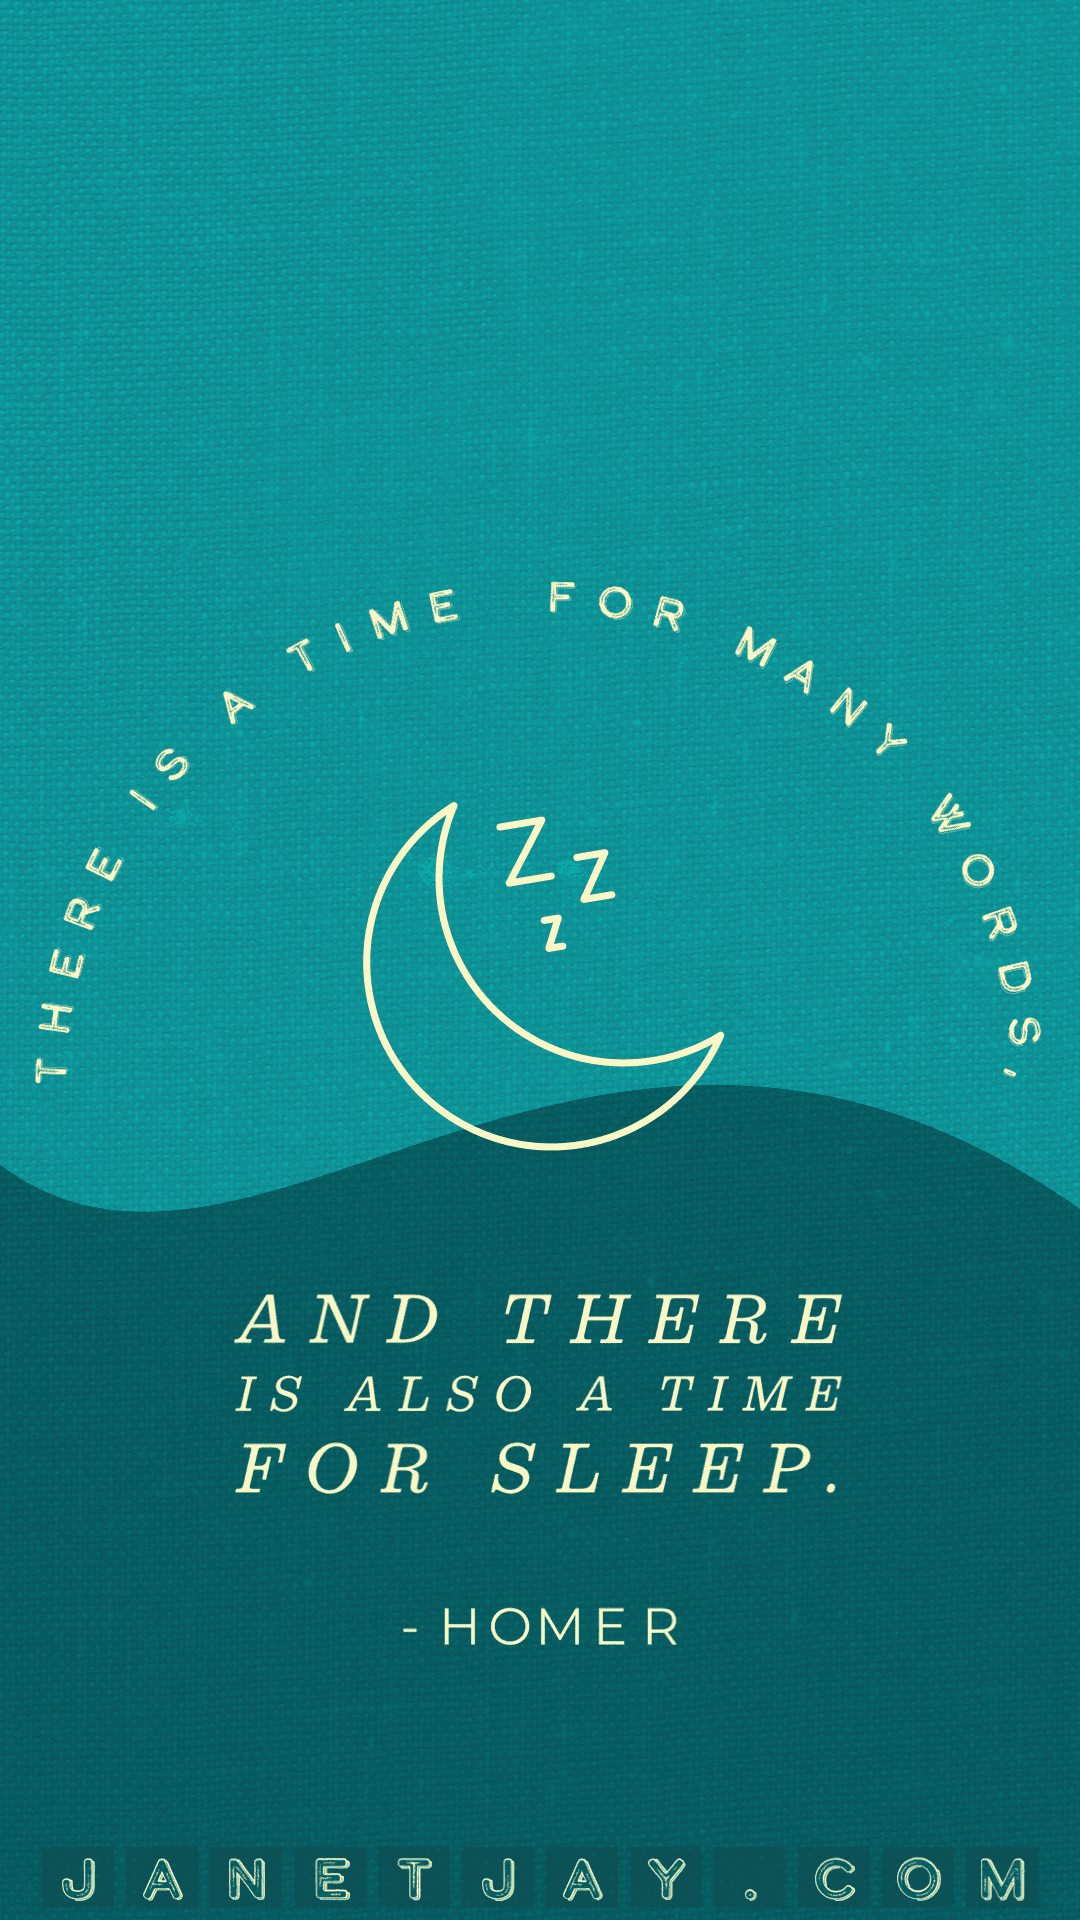 Text surrounds a moon, reading "There is a time for many things, and there is also a time for sleep," - Homer, janetjay.com